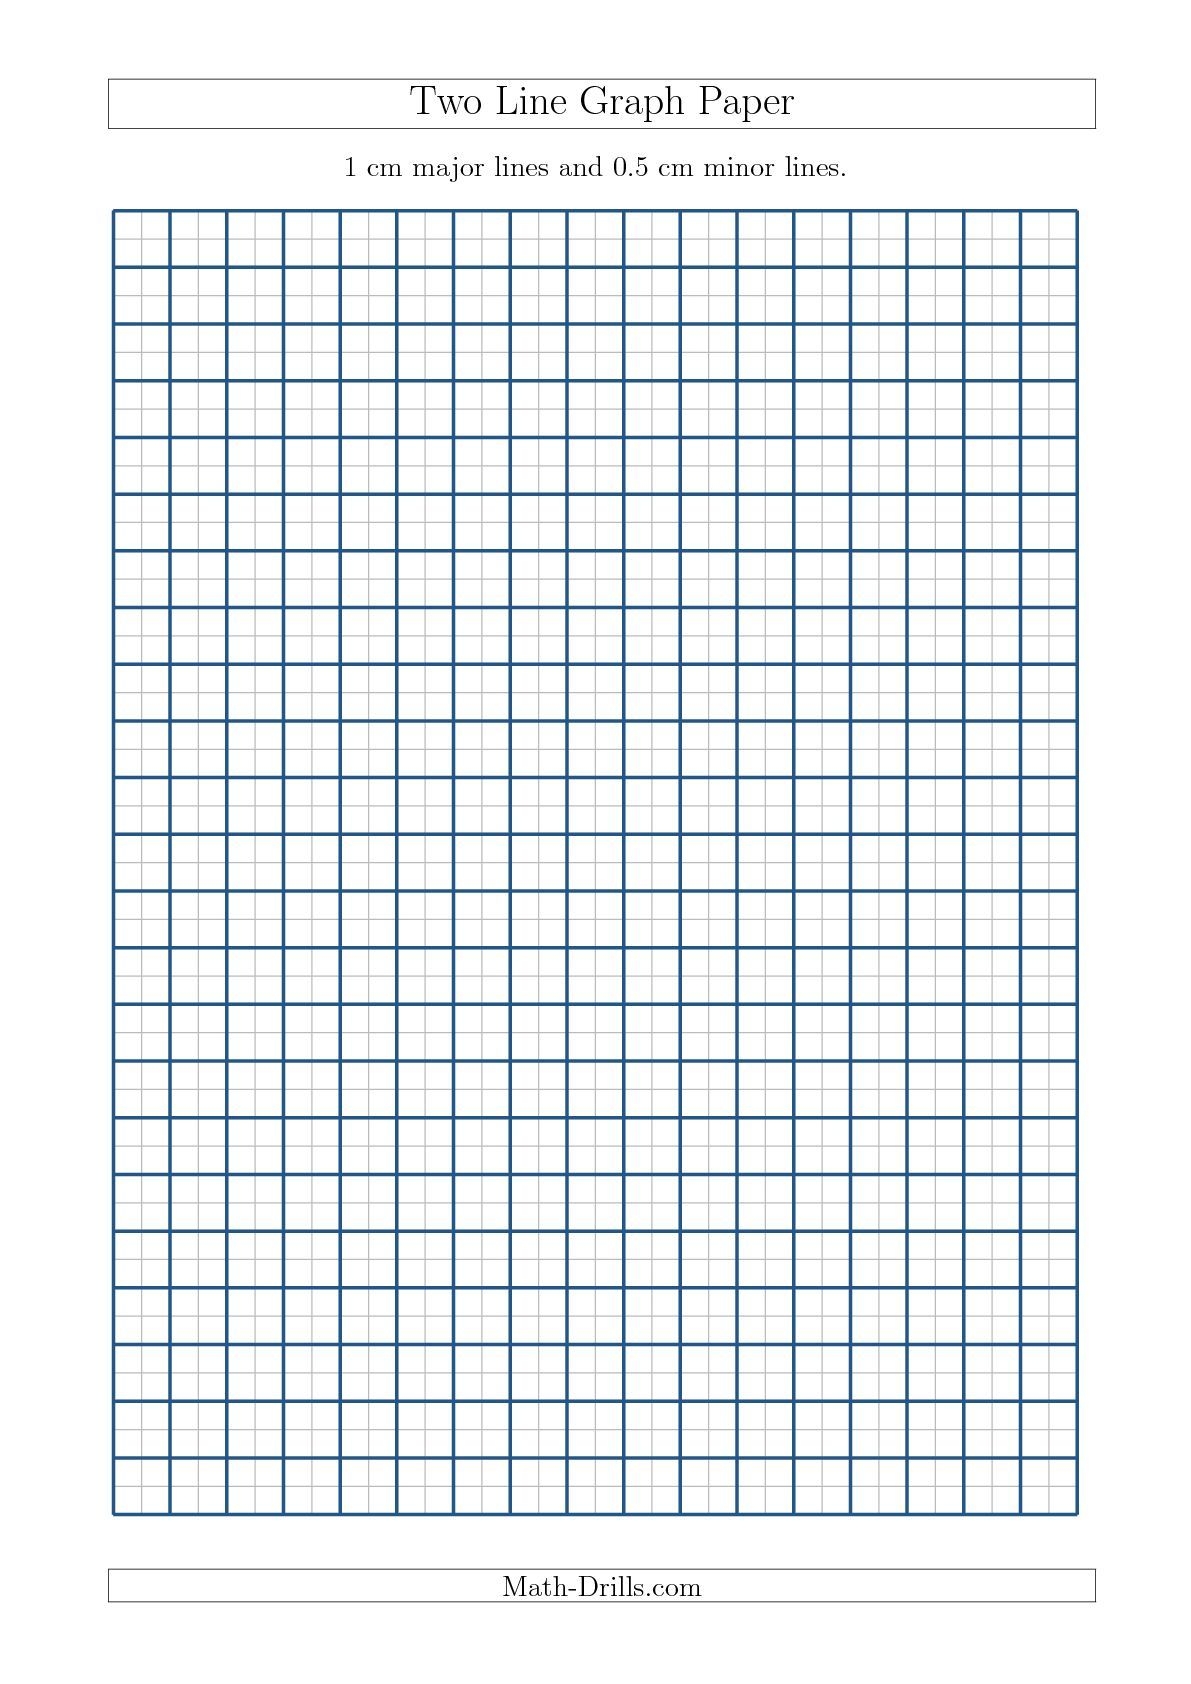 Two Line Graph Paper With 1 Cm Major Lines And 0 5 Cm Minor Lines A4 Size A Graph Paper Printable Graph Paper Graph Paper Line Graphs